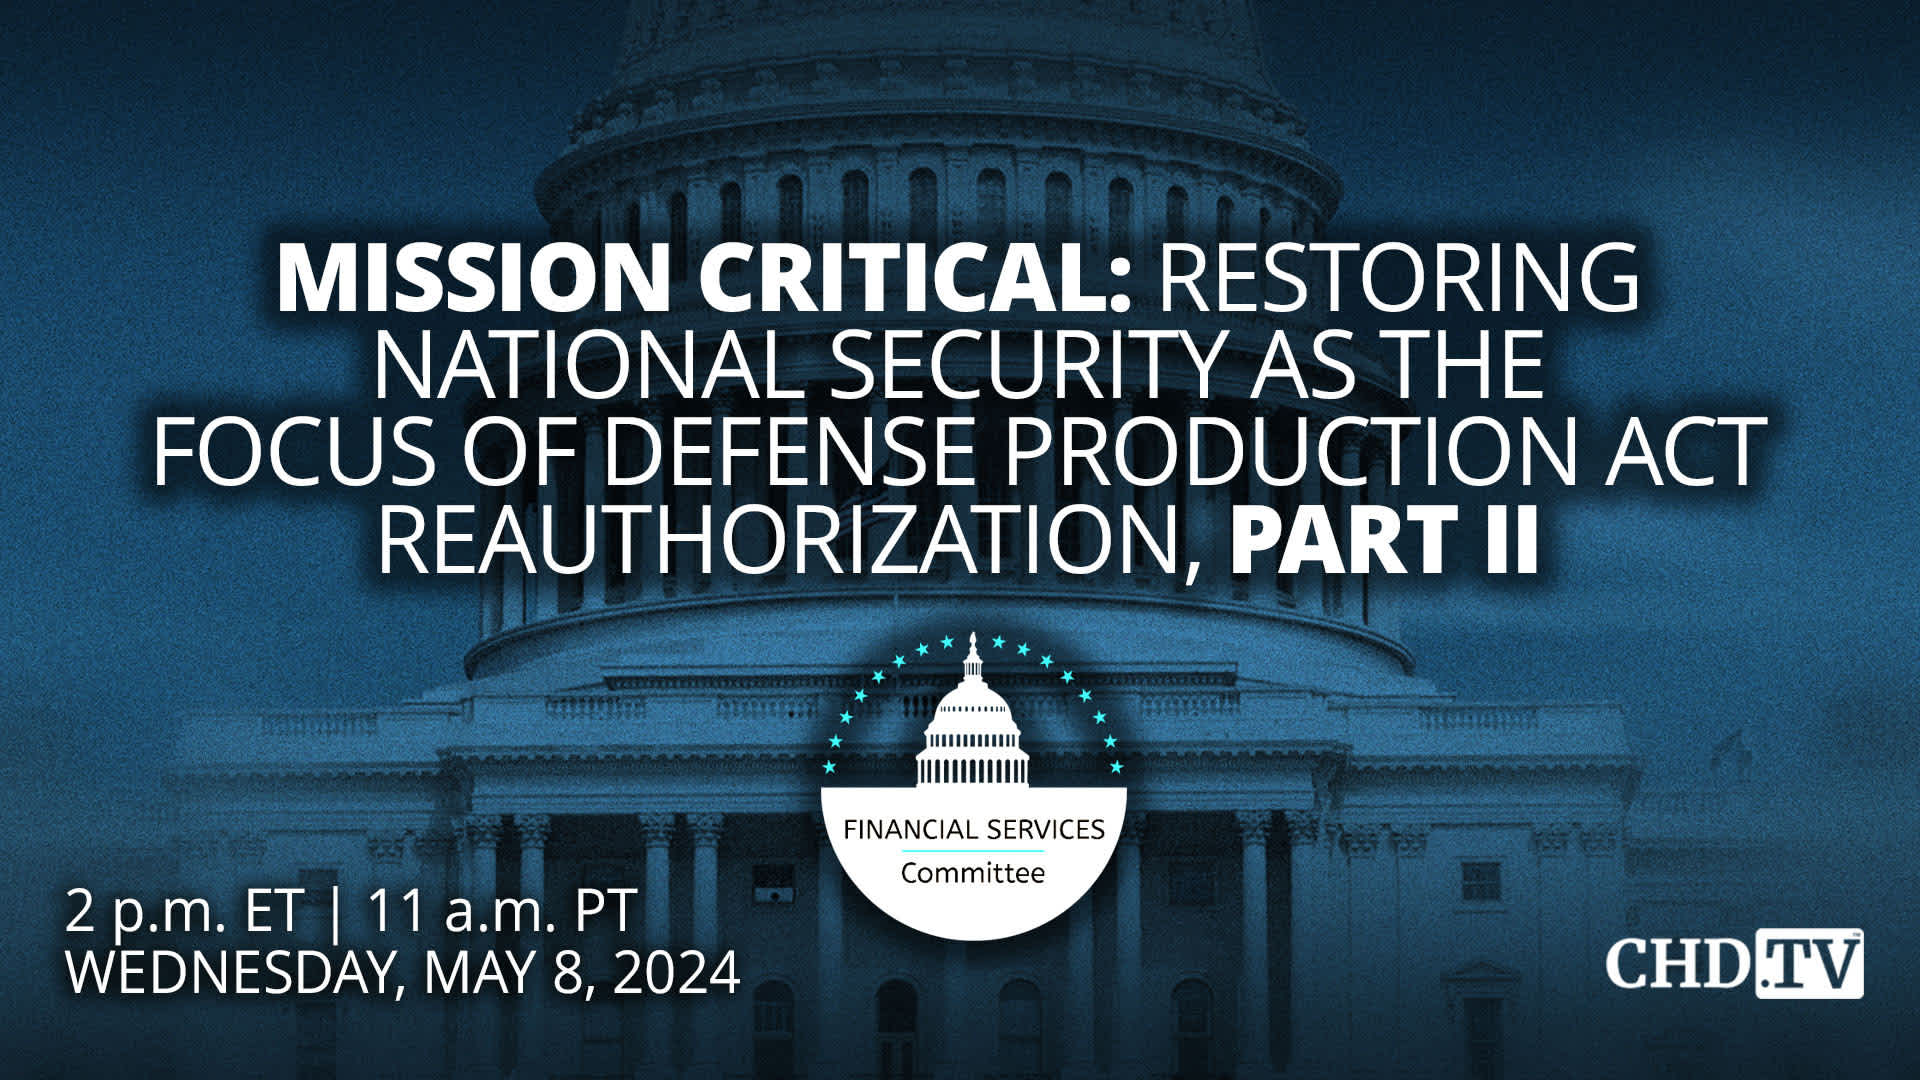 Mission Critical: Restoring National Security as the Focus of Defense Production Act Reauthorization, Part II | May 8